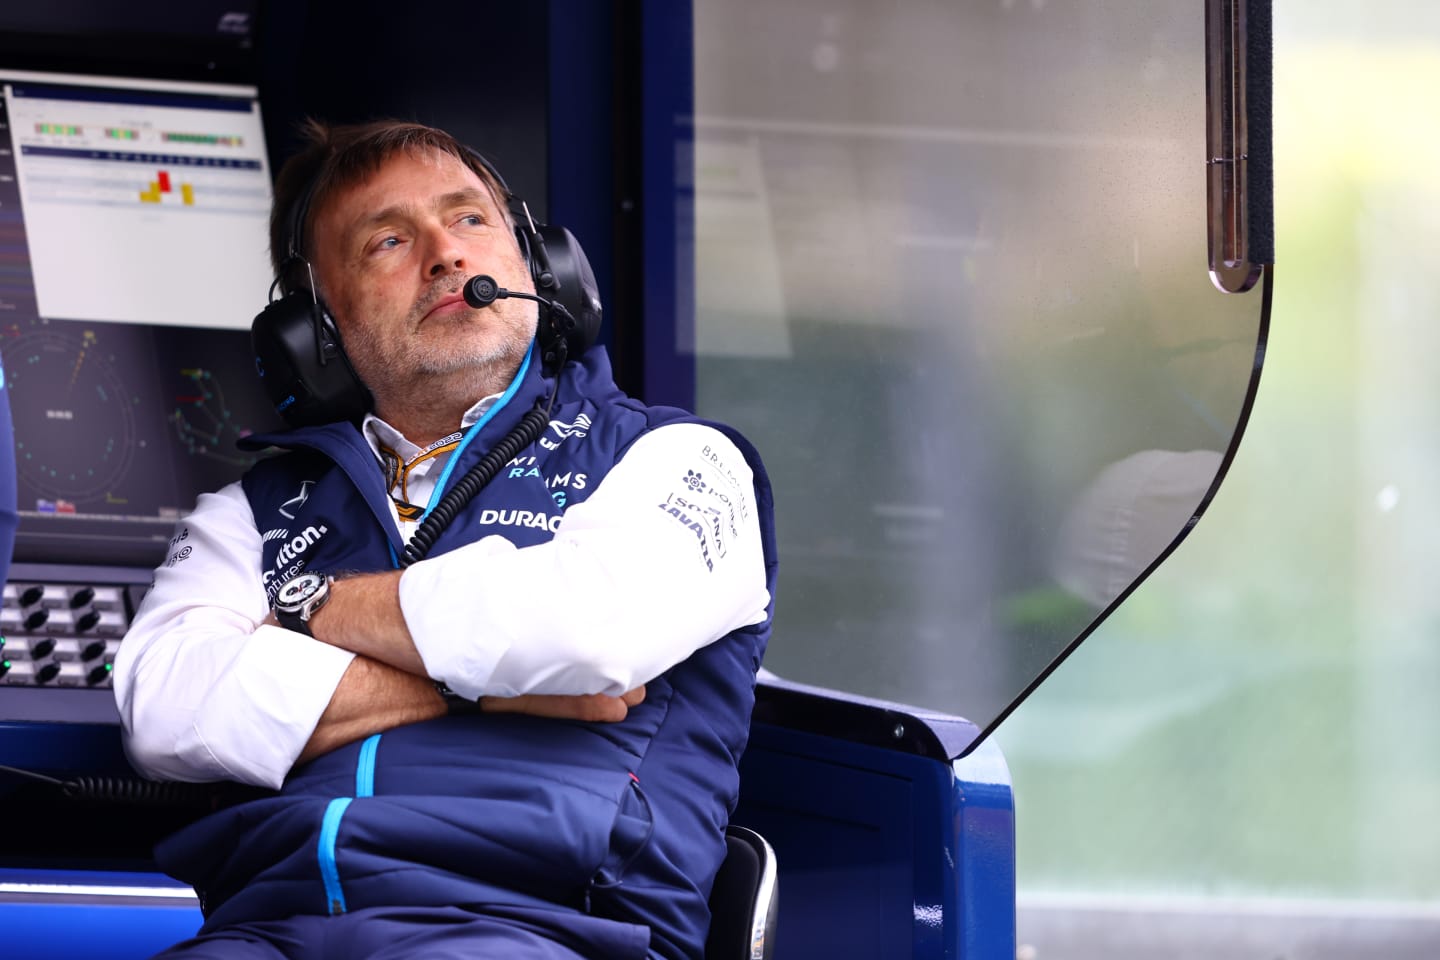 SPA, BELGIUM - AUGUST 26: Jost Capito, CEO of Williams F1 looks on from the pitwall during practice